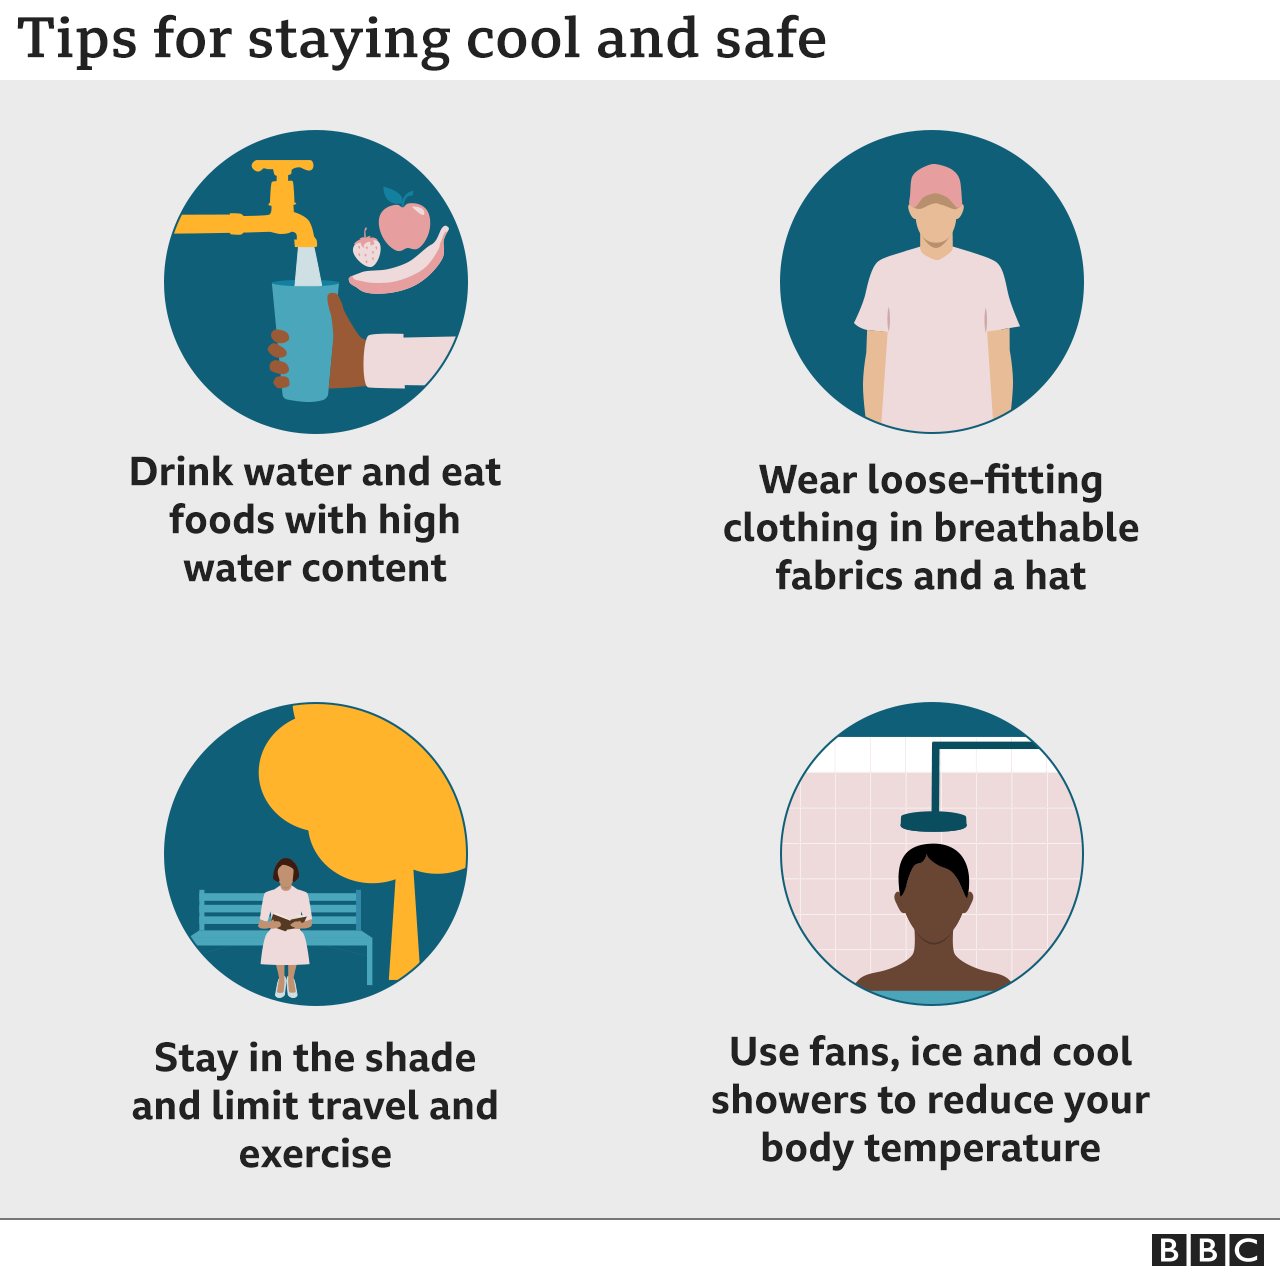 Tips for staying cool: drink water and eat foods with a high water content; wear loose-fitting, breathable clothing and a hat.stay in the shade, limit exercise and exercise; use fans, ice cubes, and cold showers to lower body temperature